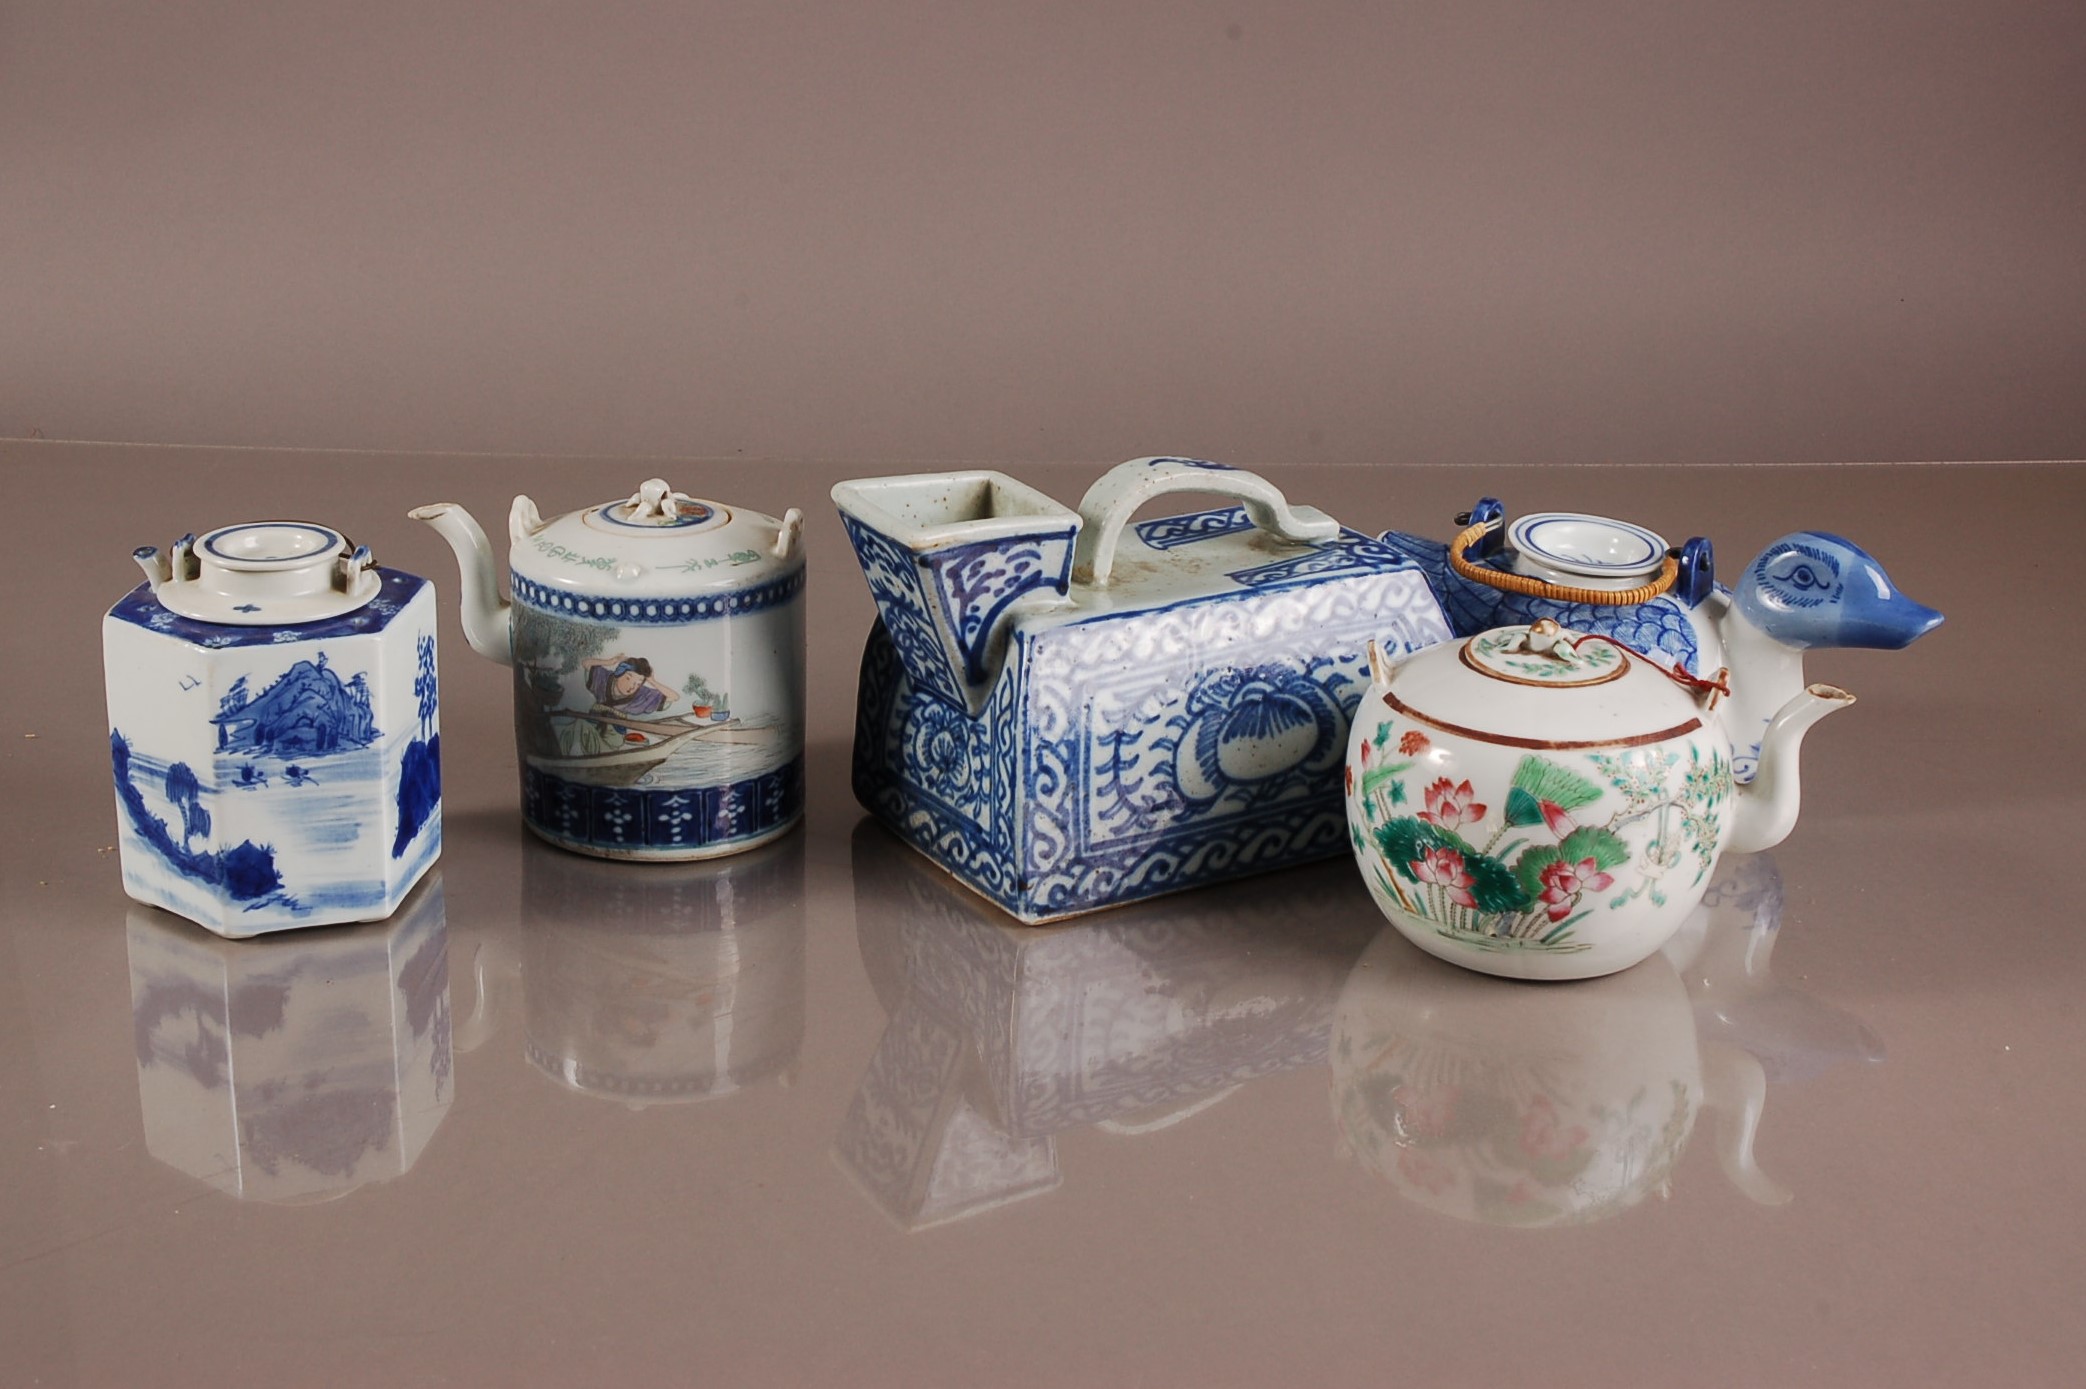 Four Oriental porcelain teapots and a Chinese porcelain iron, the blue and white Chinese porcleain